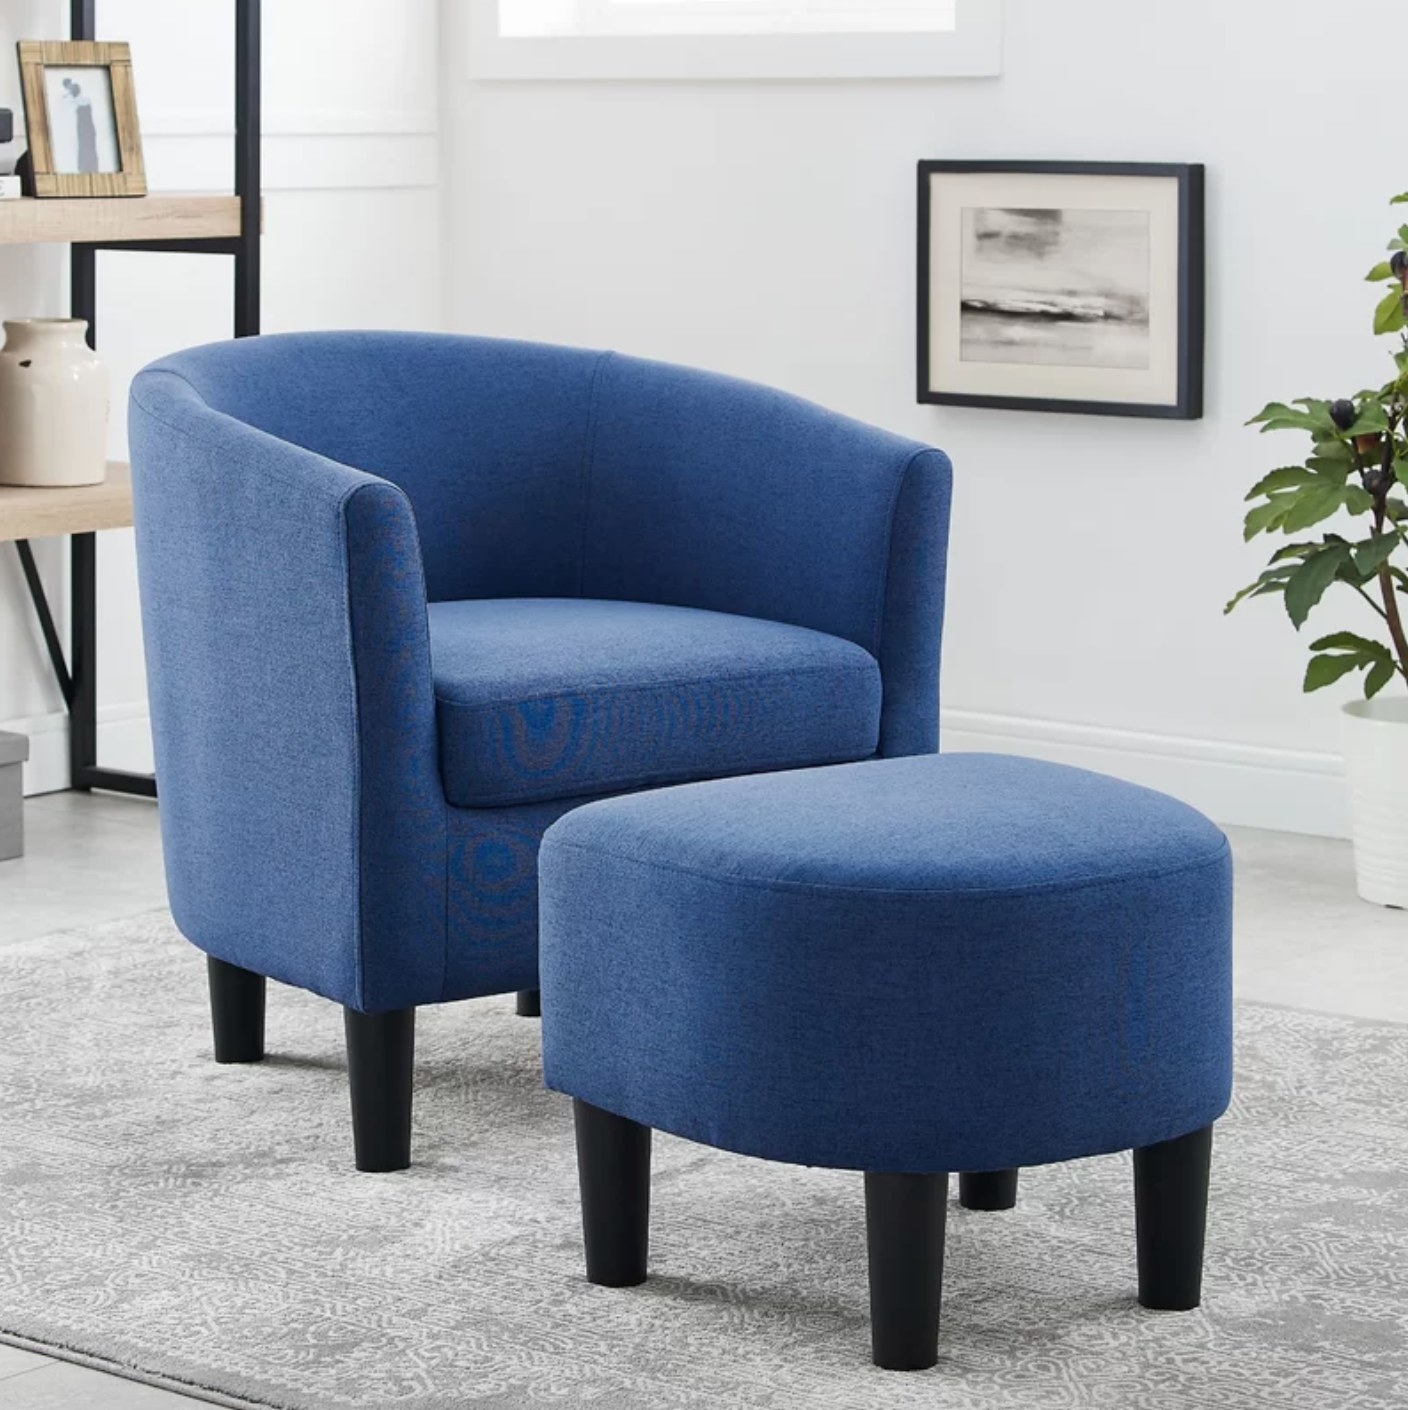 The cloud barrel chair and ottoman in blue